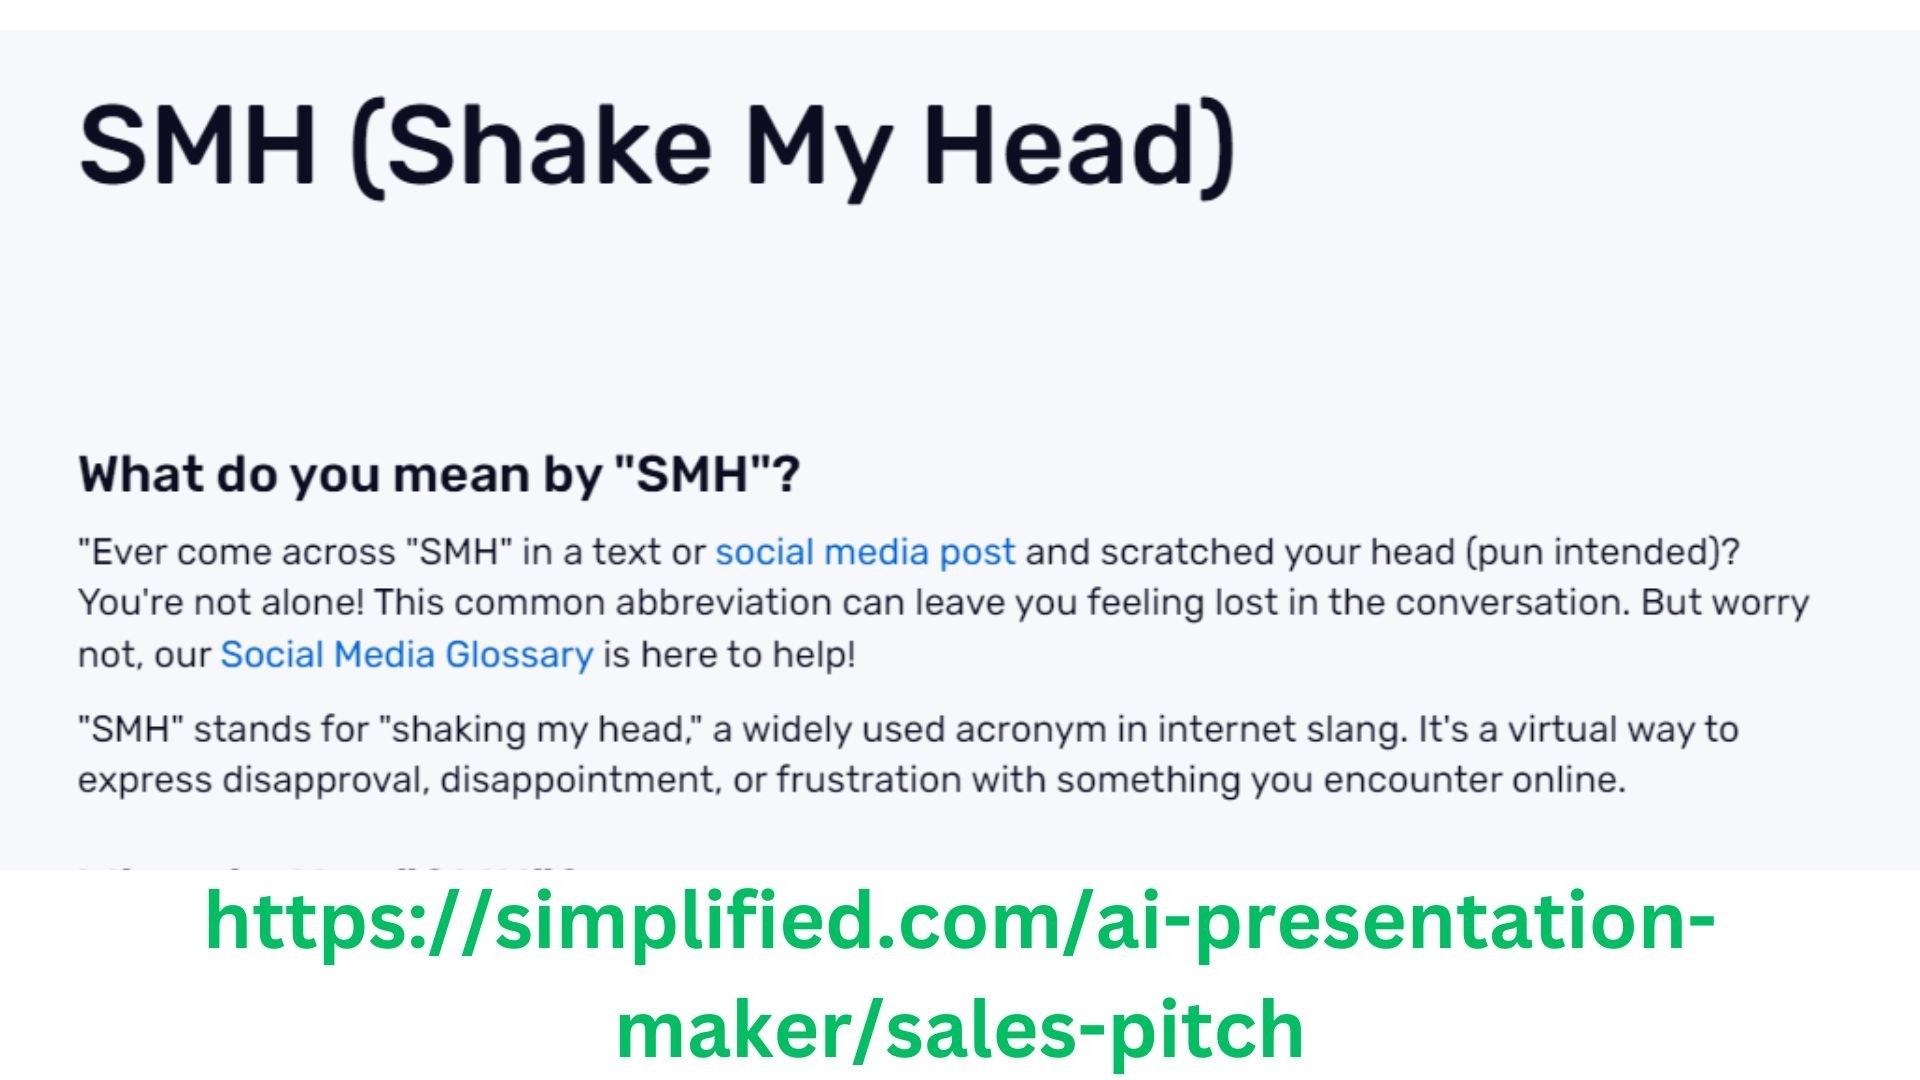 Shake My Head (SMH): Meaning and Everyday Usage